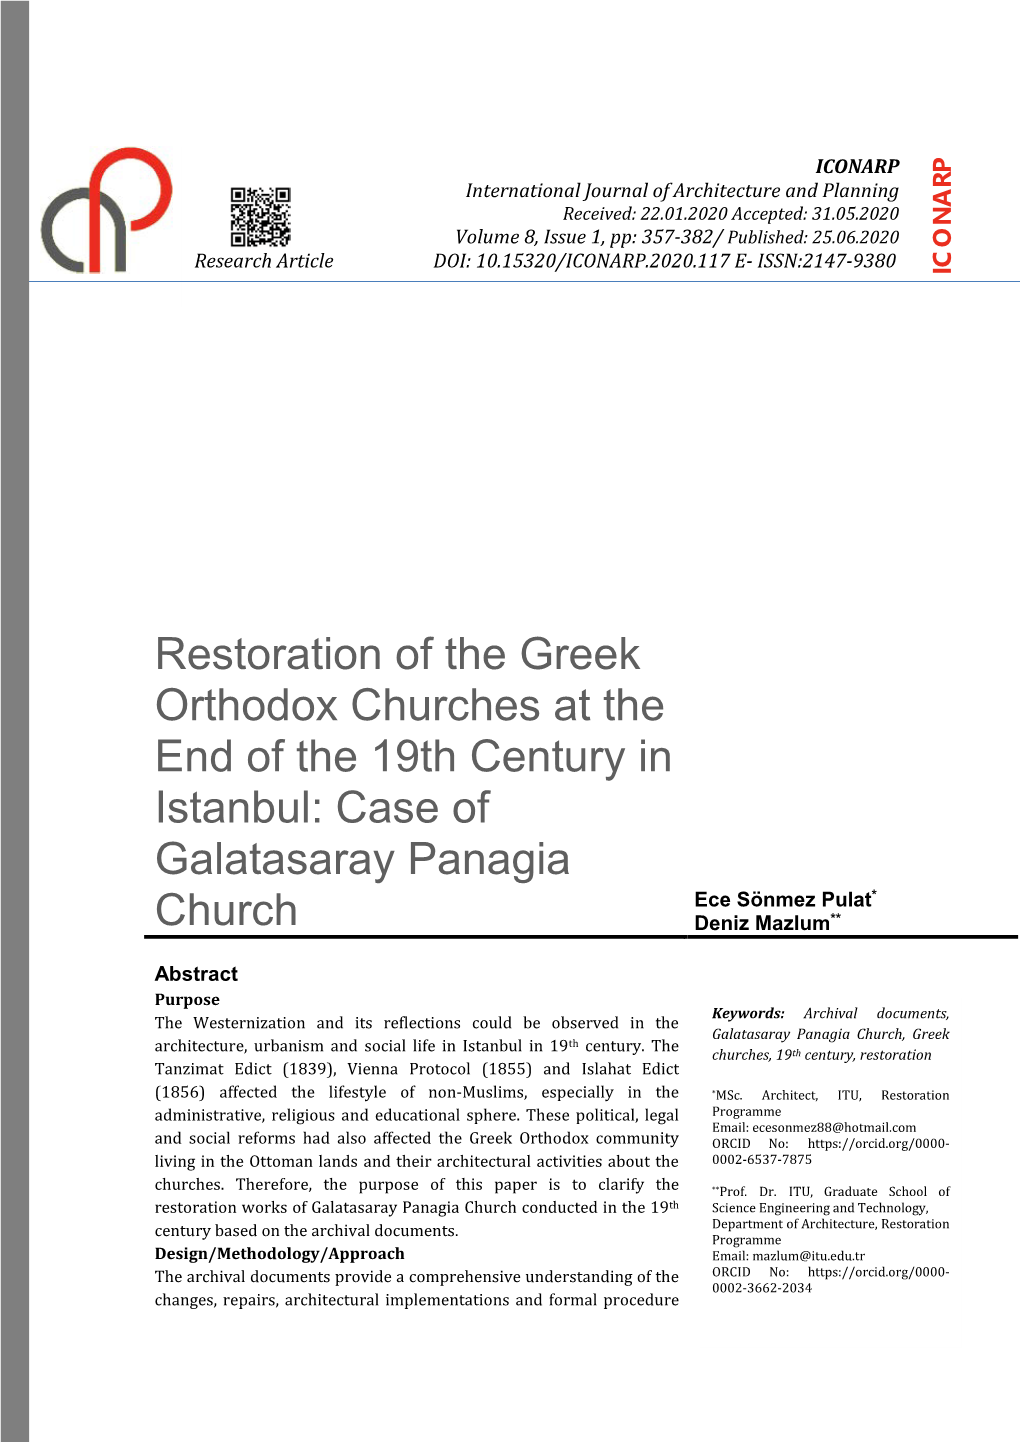 Restoration of the Greek Orthodox Churches at the End of the 19Th Century in Istanbul: Case Of